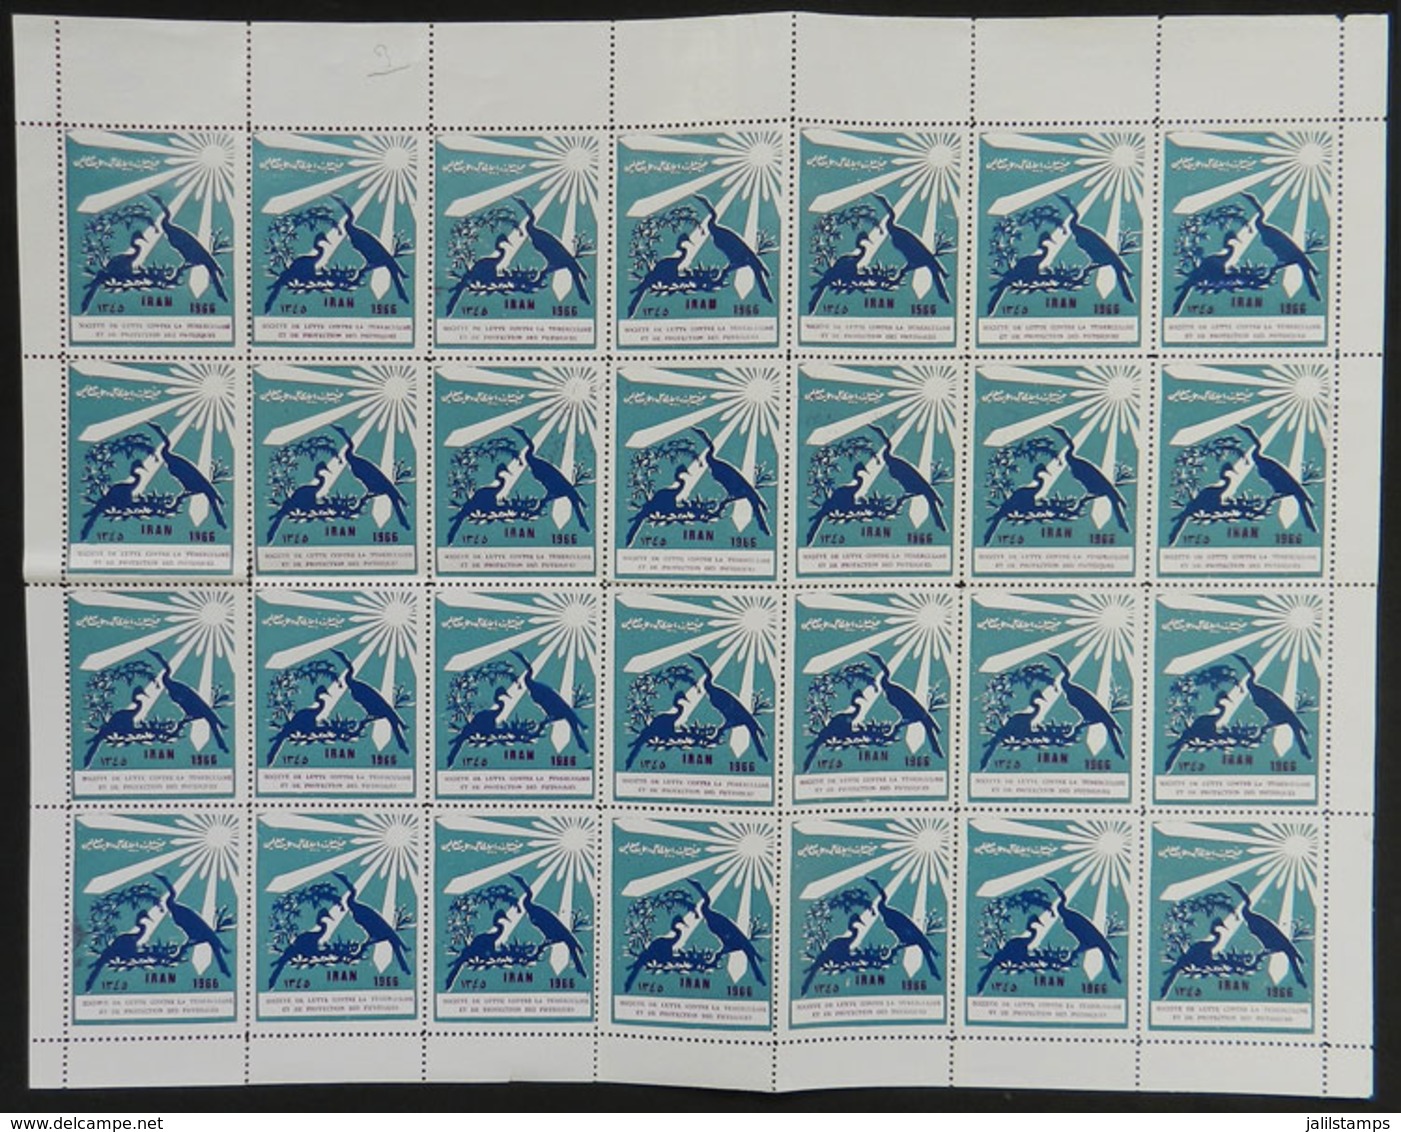 872 IRAN: FIGHT AGAINST TUBERCULOSIS: 1966 Issue, Large Block Of 28 Cinderellas, MNH - Iran